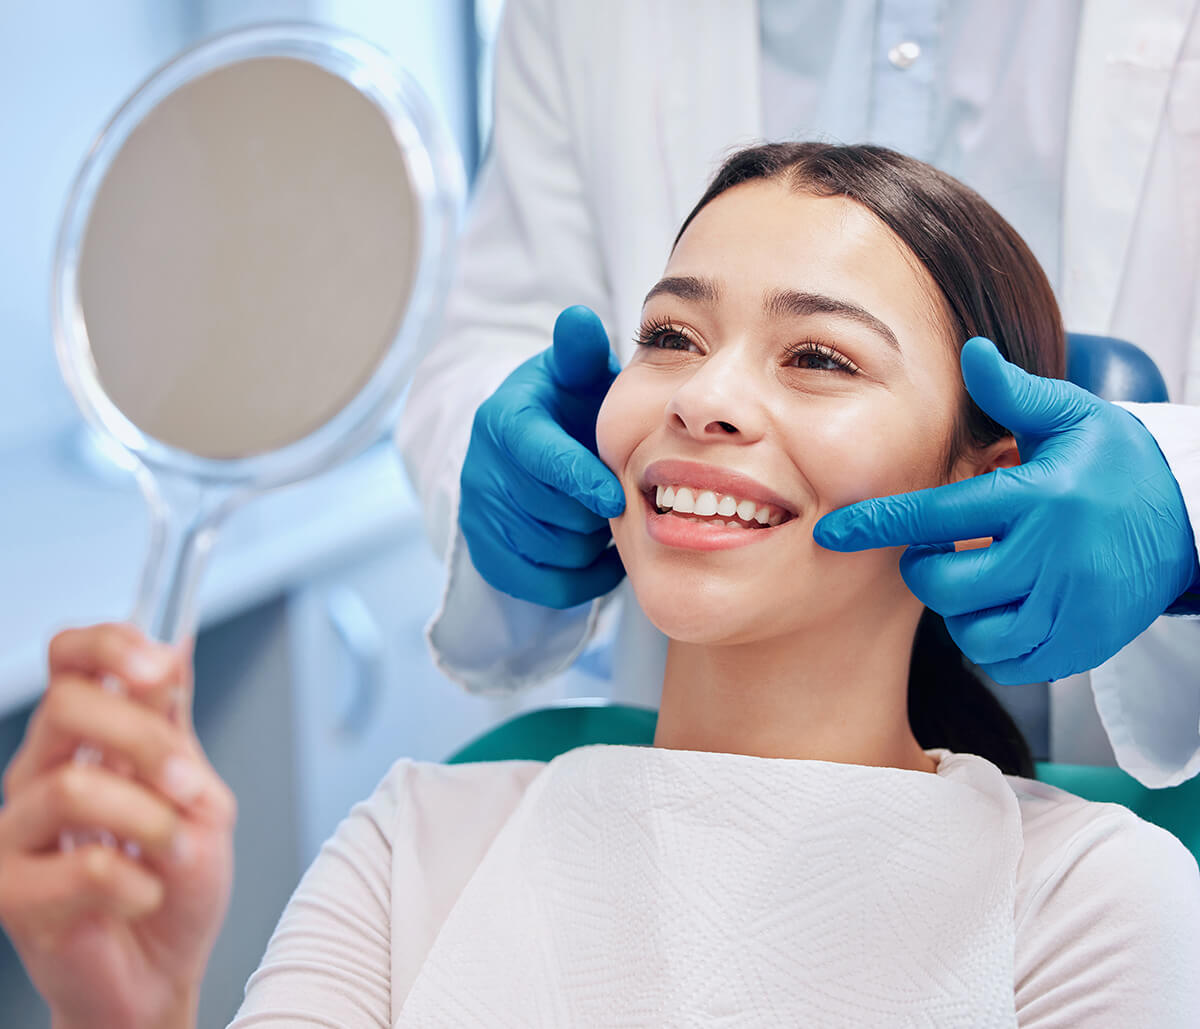 Dentist Accepting New Patients in Calgary AB Area